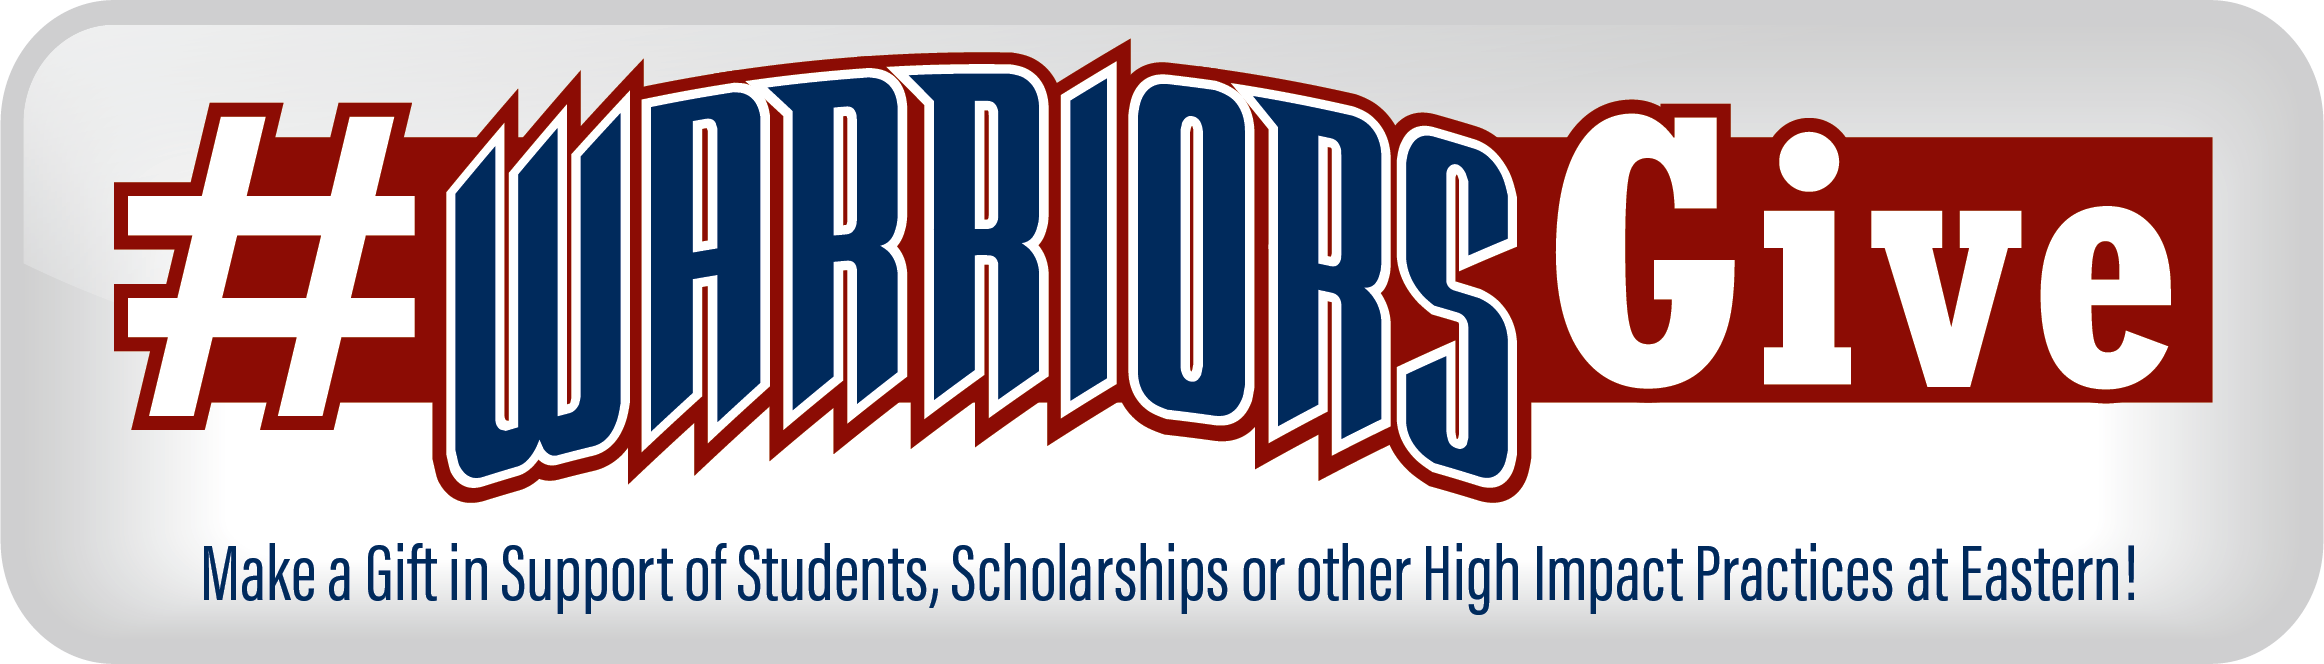 #WarriorsGive - Make a gift in support of students, scholarships or other high impact practices at Eastern!